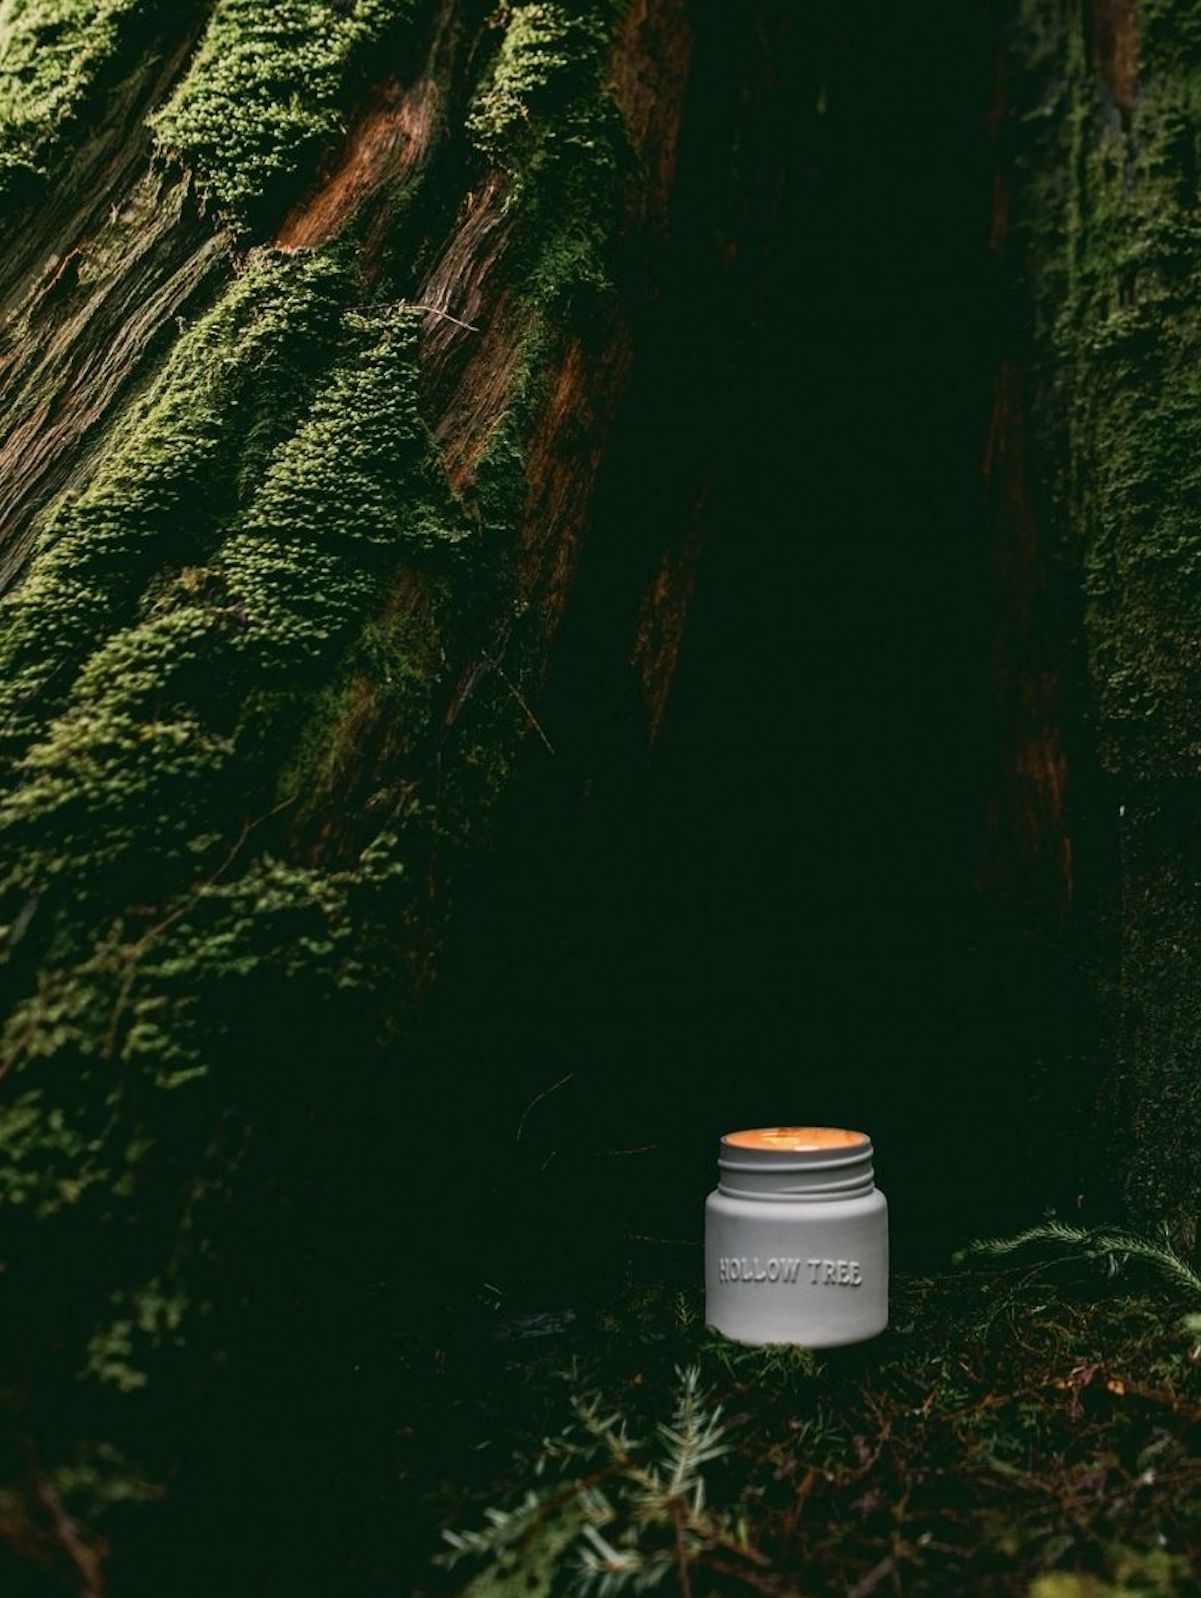 Cathedral Grove Candle